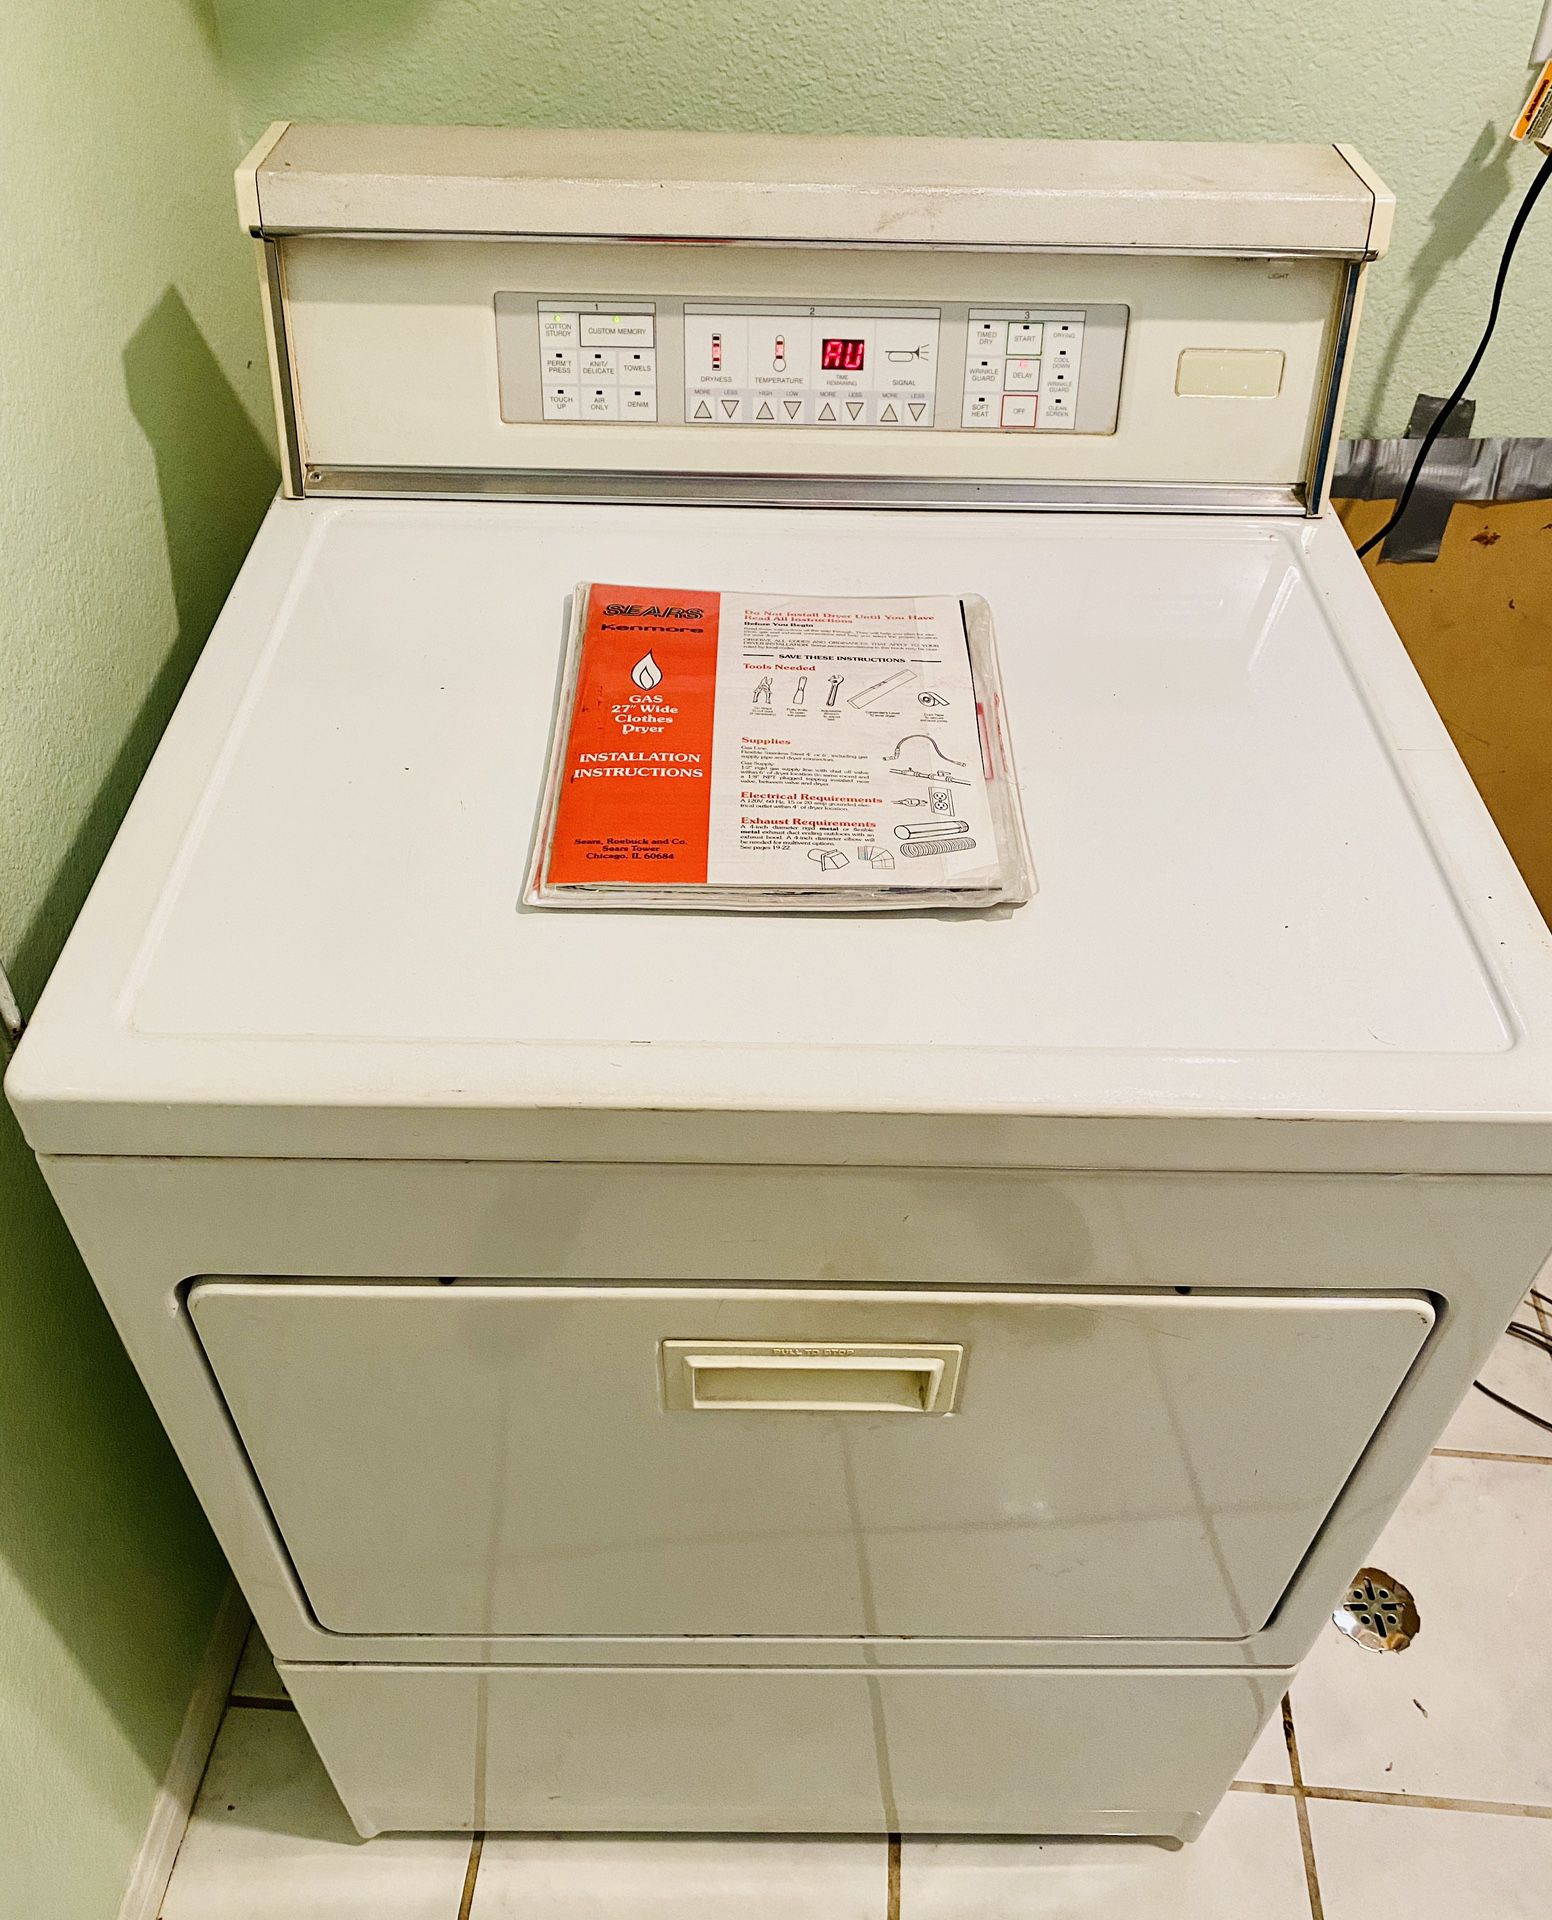 FREE Kenmore 27” Wide Gas Dryer